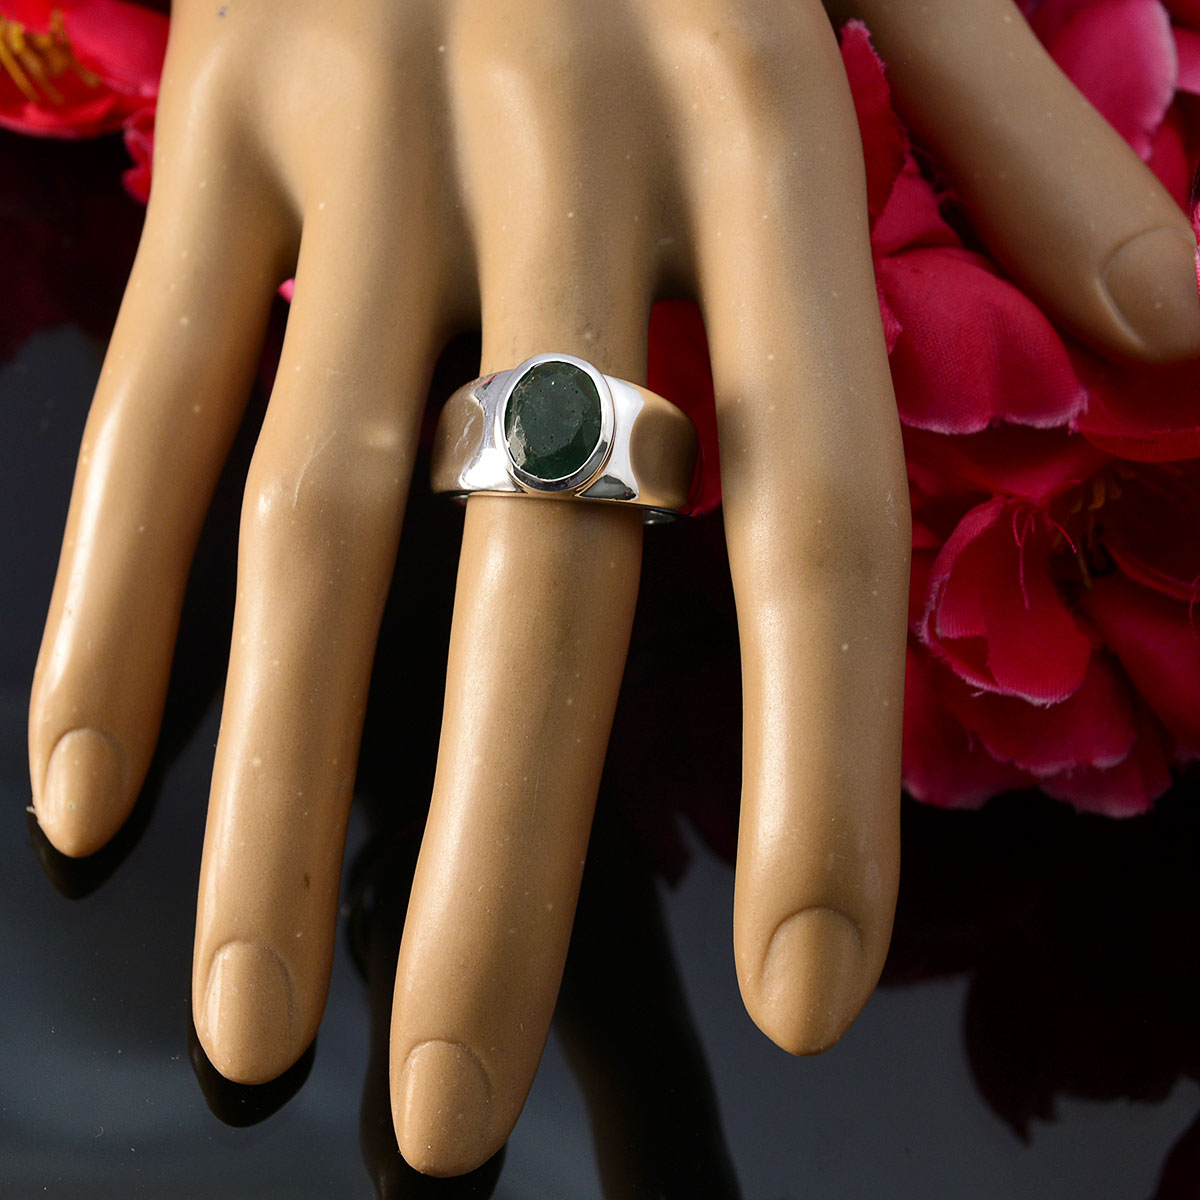 Natural Gems Indianemerald Sterling Silver Ring Jewelry For Men